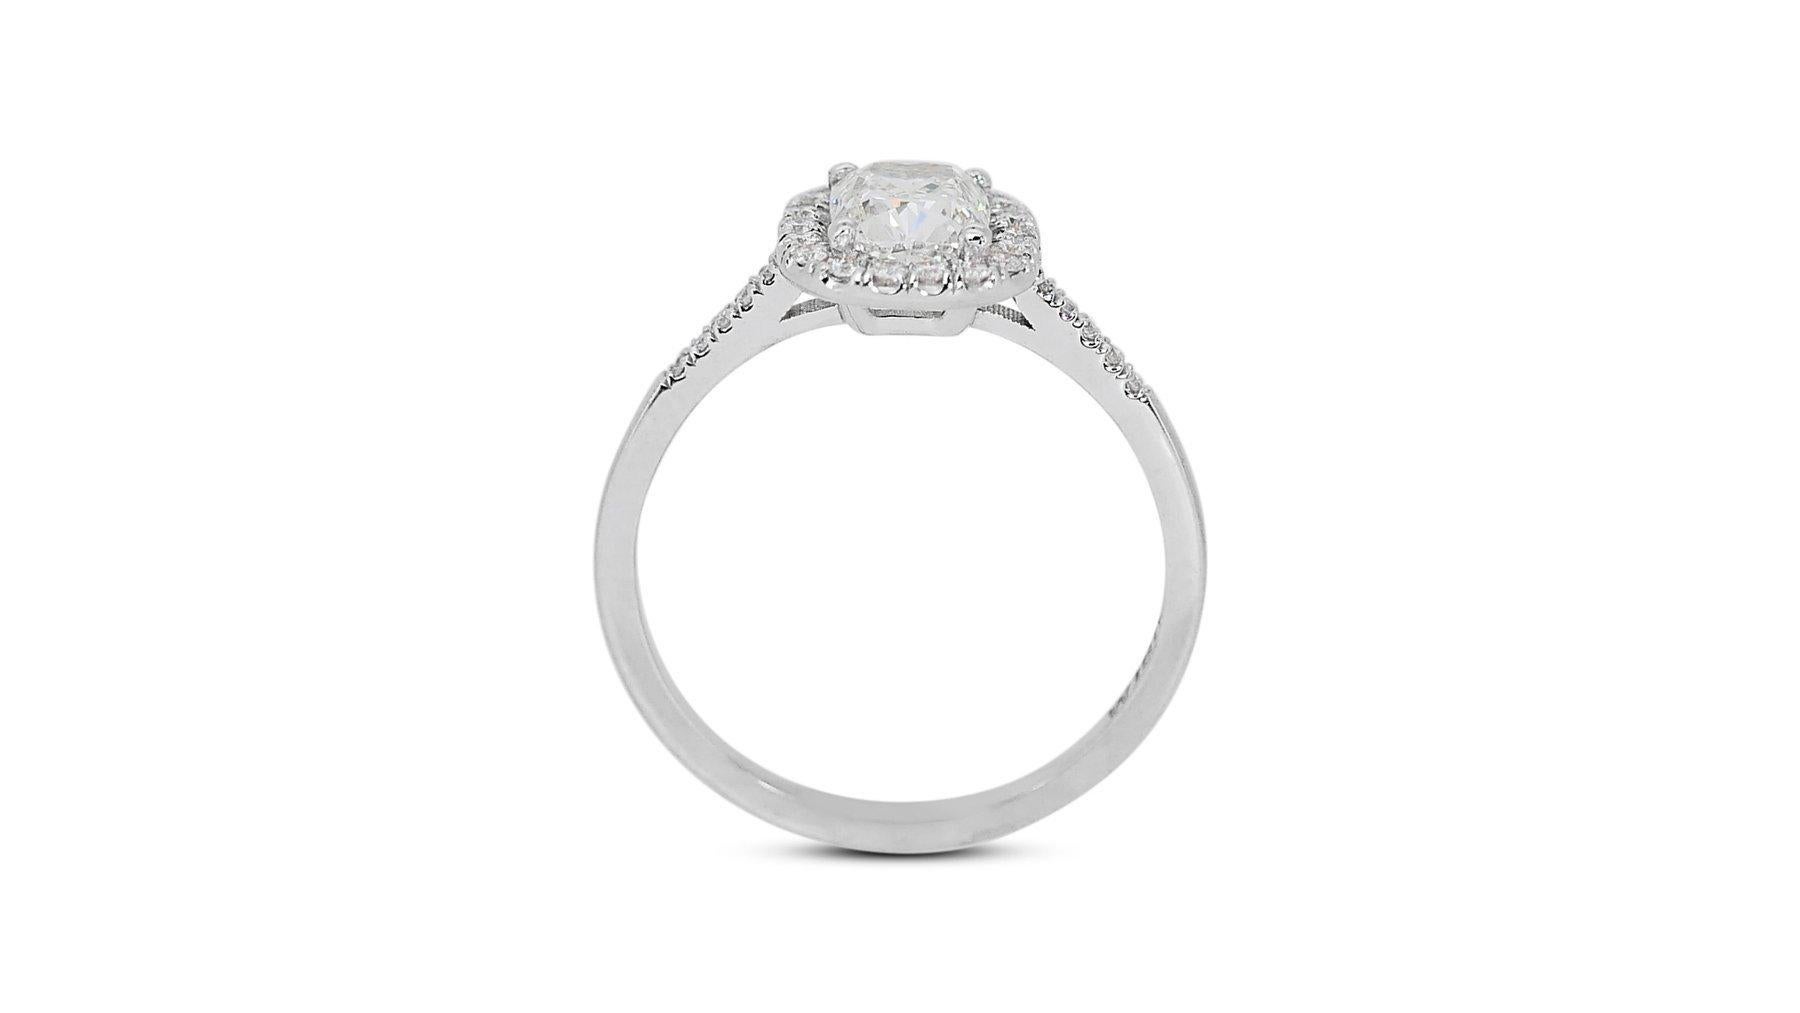 Luxurious 1.71ct Diamond Halo Ring in 18k White Gold - GIA Certified

Experience luxury with this exquisite 18k white gold halo ring, featuring a captivating 1.49-carat cushion-cut diamond as the centerpiece. Encircling the main stone are 28